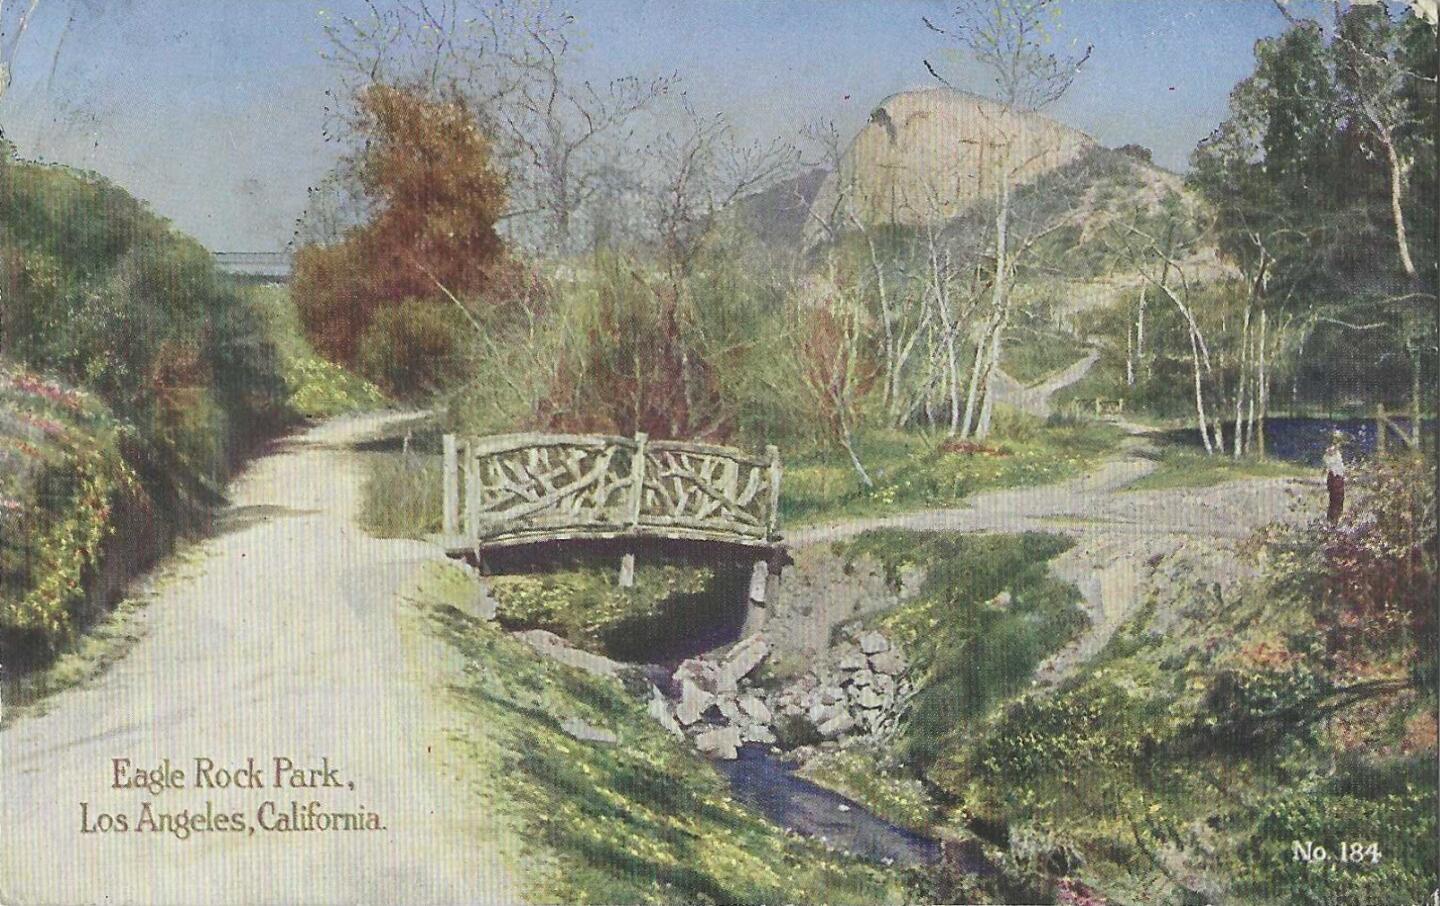 A vintage postcard depicts a riparian scene in Eagle Rock